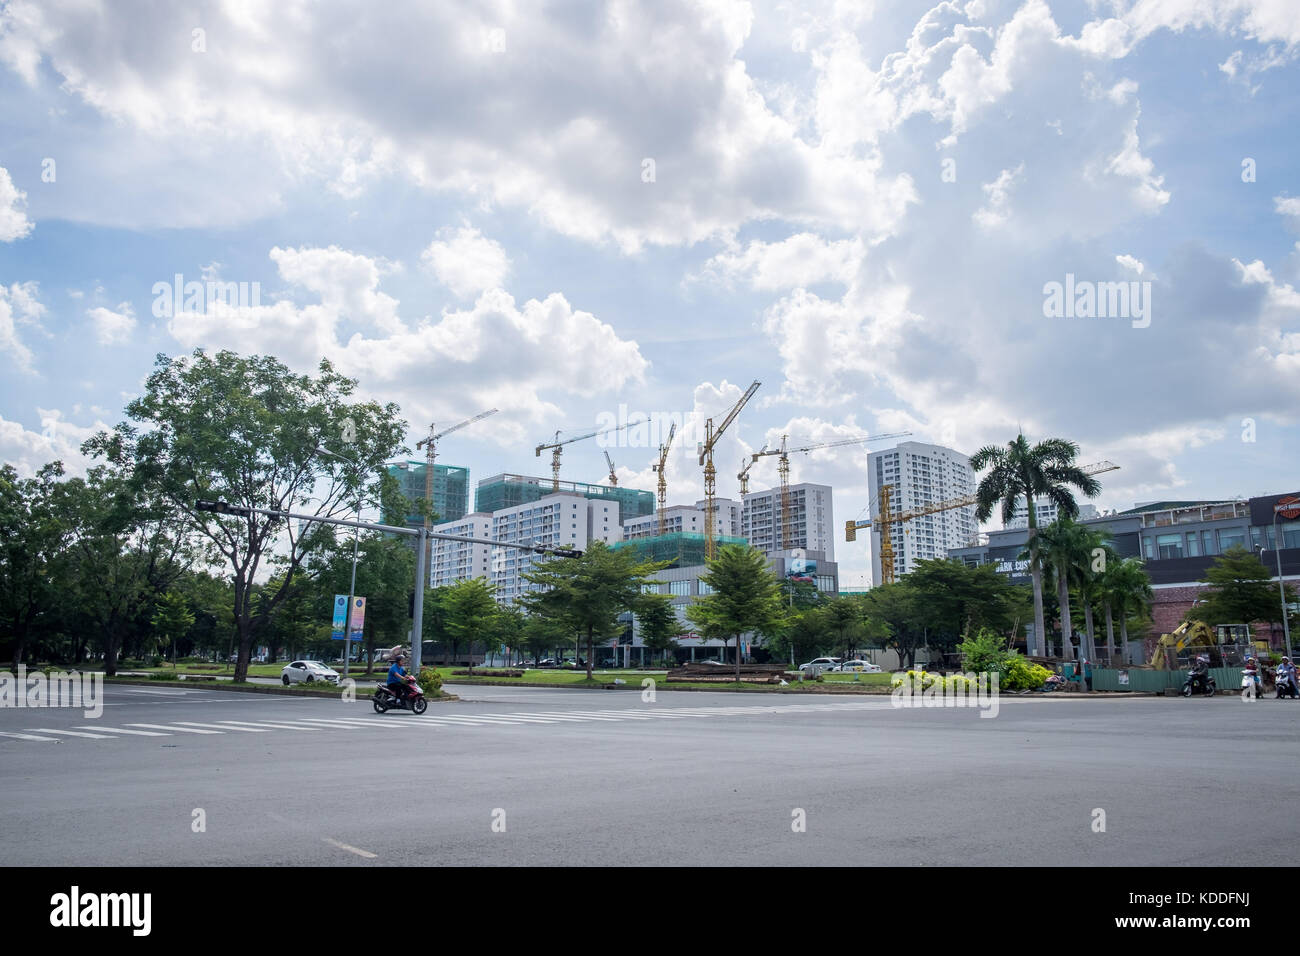 Cityscape of Phu My Hung. Phu My Hung is one of the most developed districts of Ho Chi Minh City, Vietnam. Stock Photo